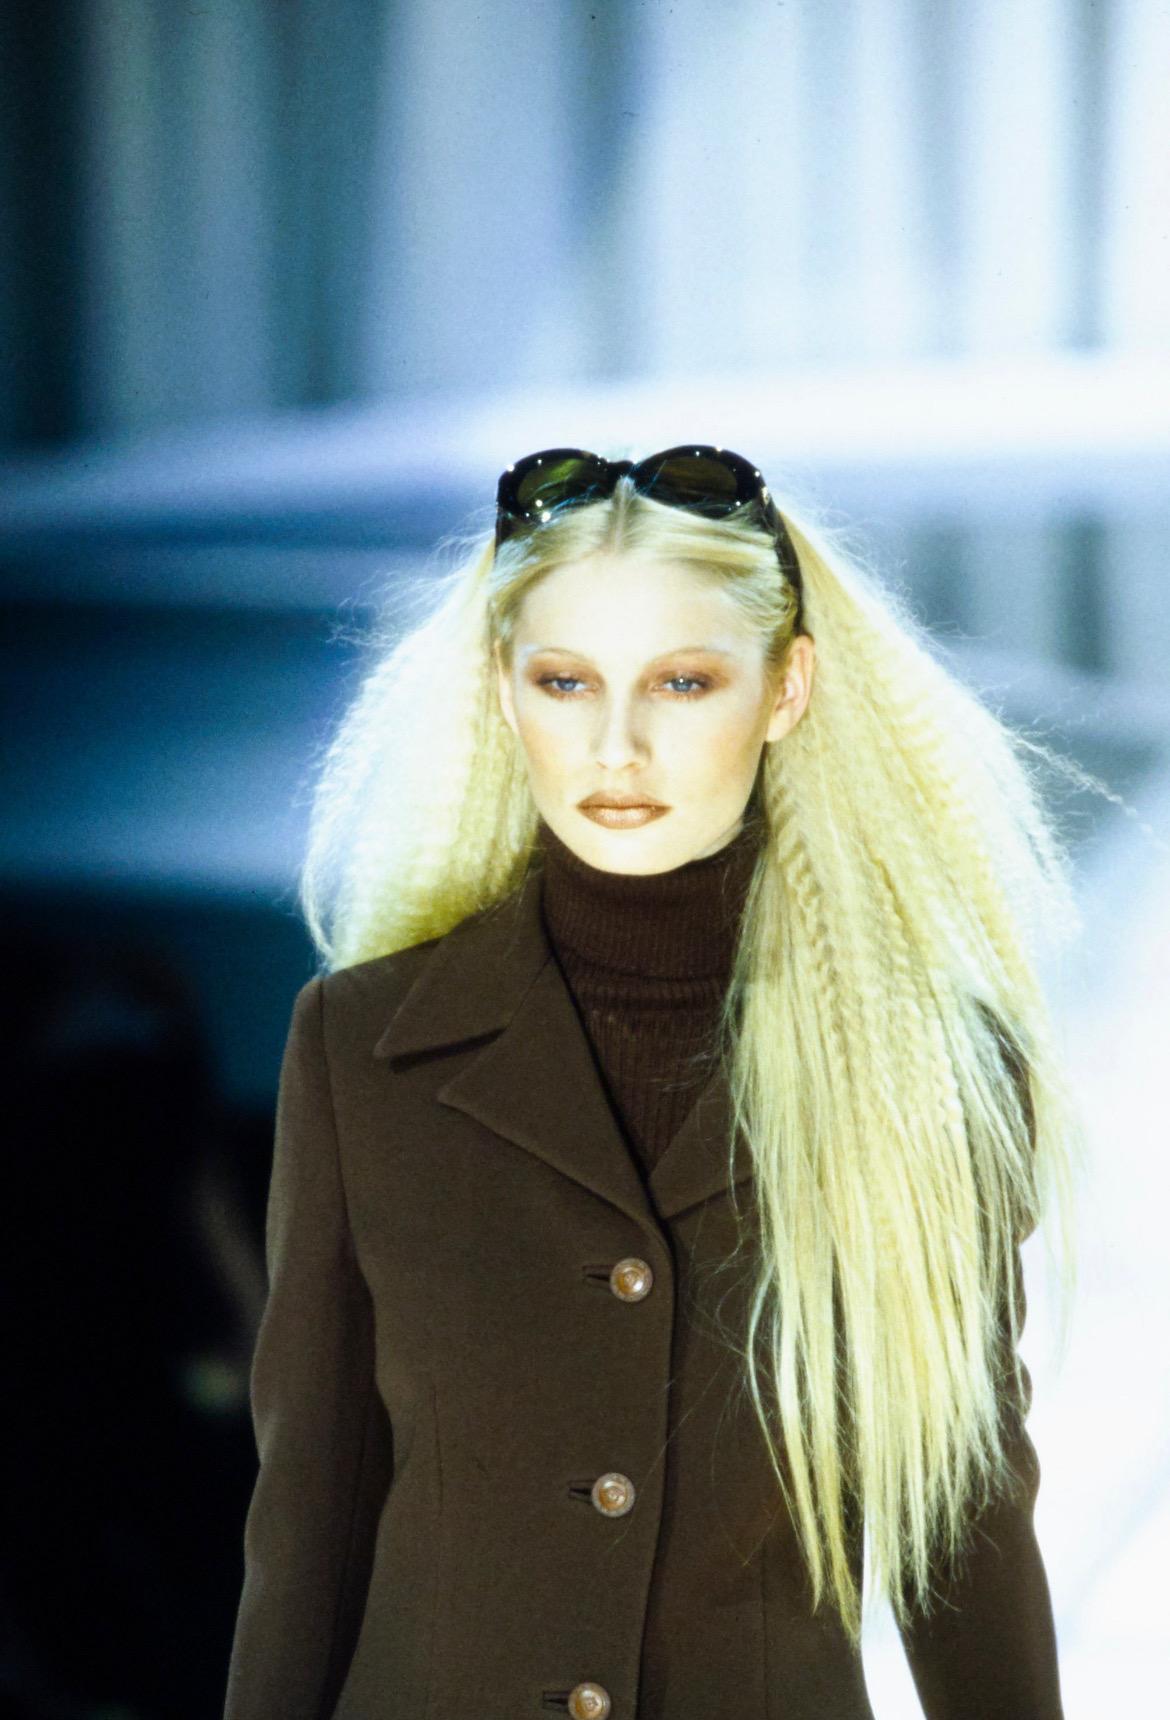 Presenting a pair of brown croc accented Gianni Versace sunglasses, designed by Gianni Versace. From the Fall/Winter 1996 collection, these sunglasses debuted as part of look 8 modeled by Kirsty Hume, and appeared several more times on the runway in